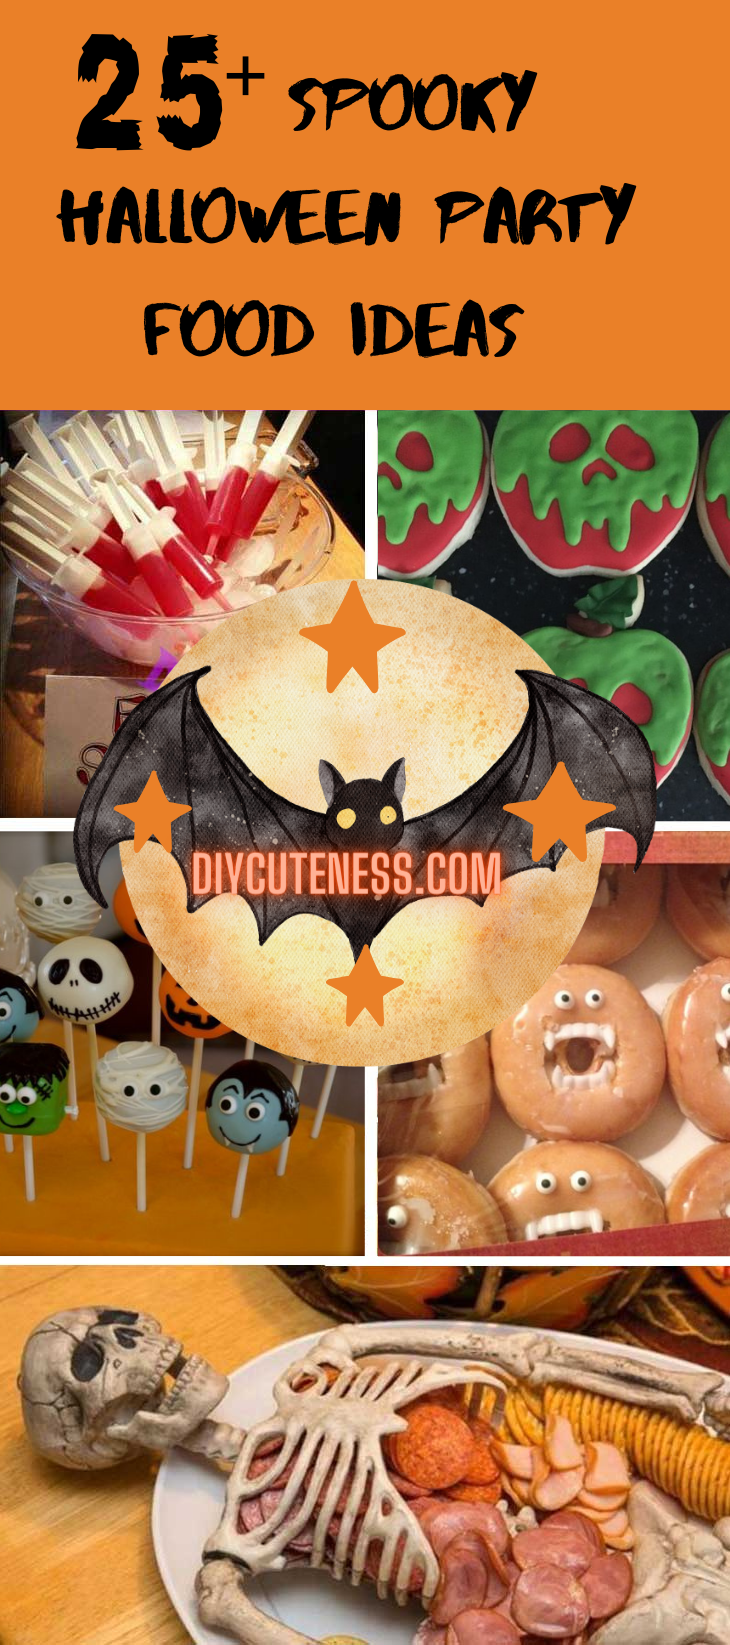 25+ Spooky Halloween Party Food Ideas for Adults